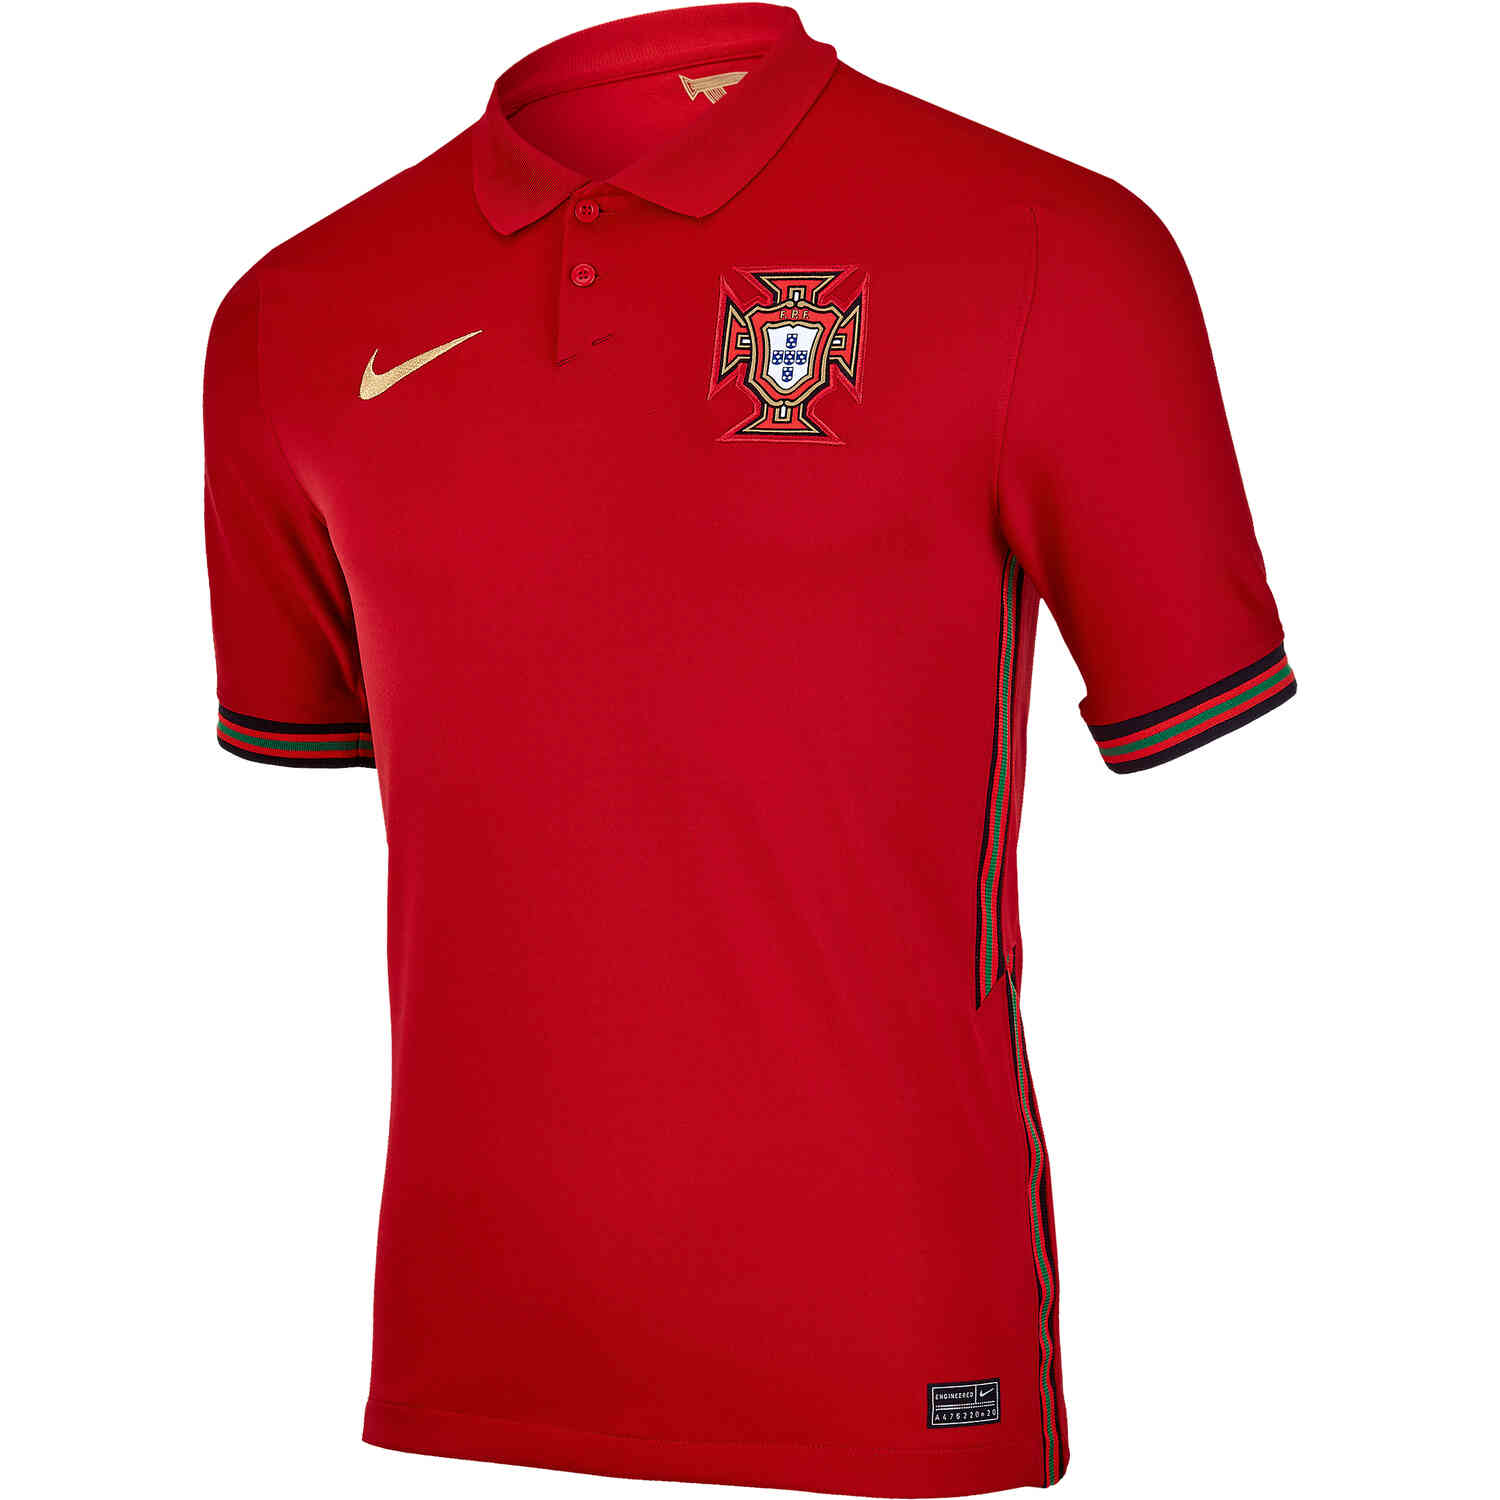 2020 Nike Portugal Home Jersey - Soccer 